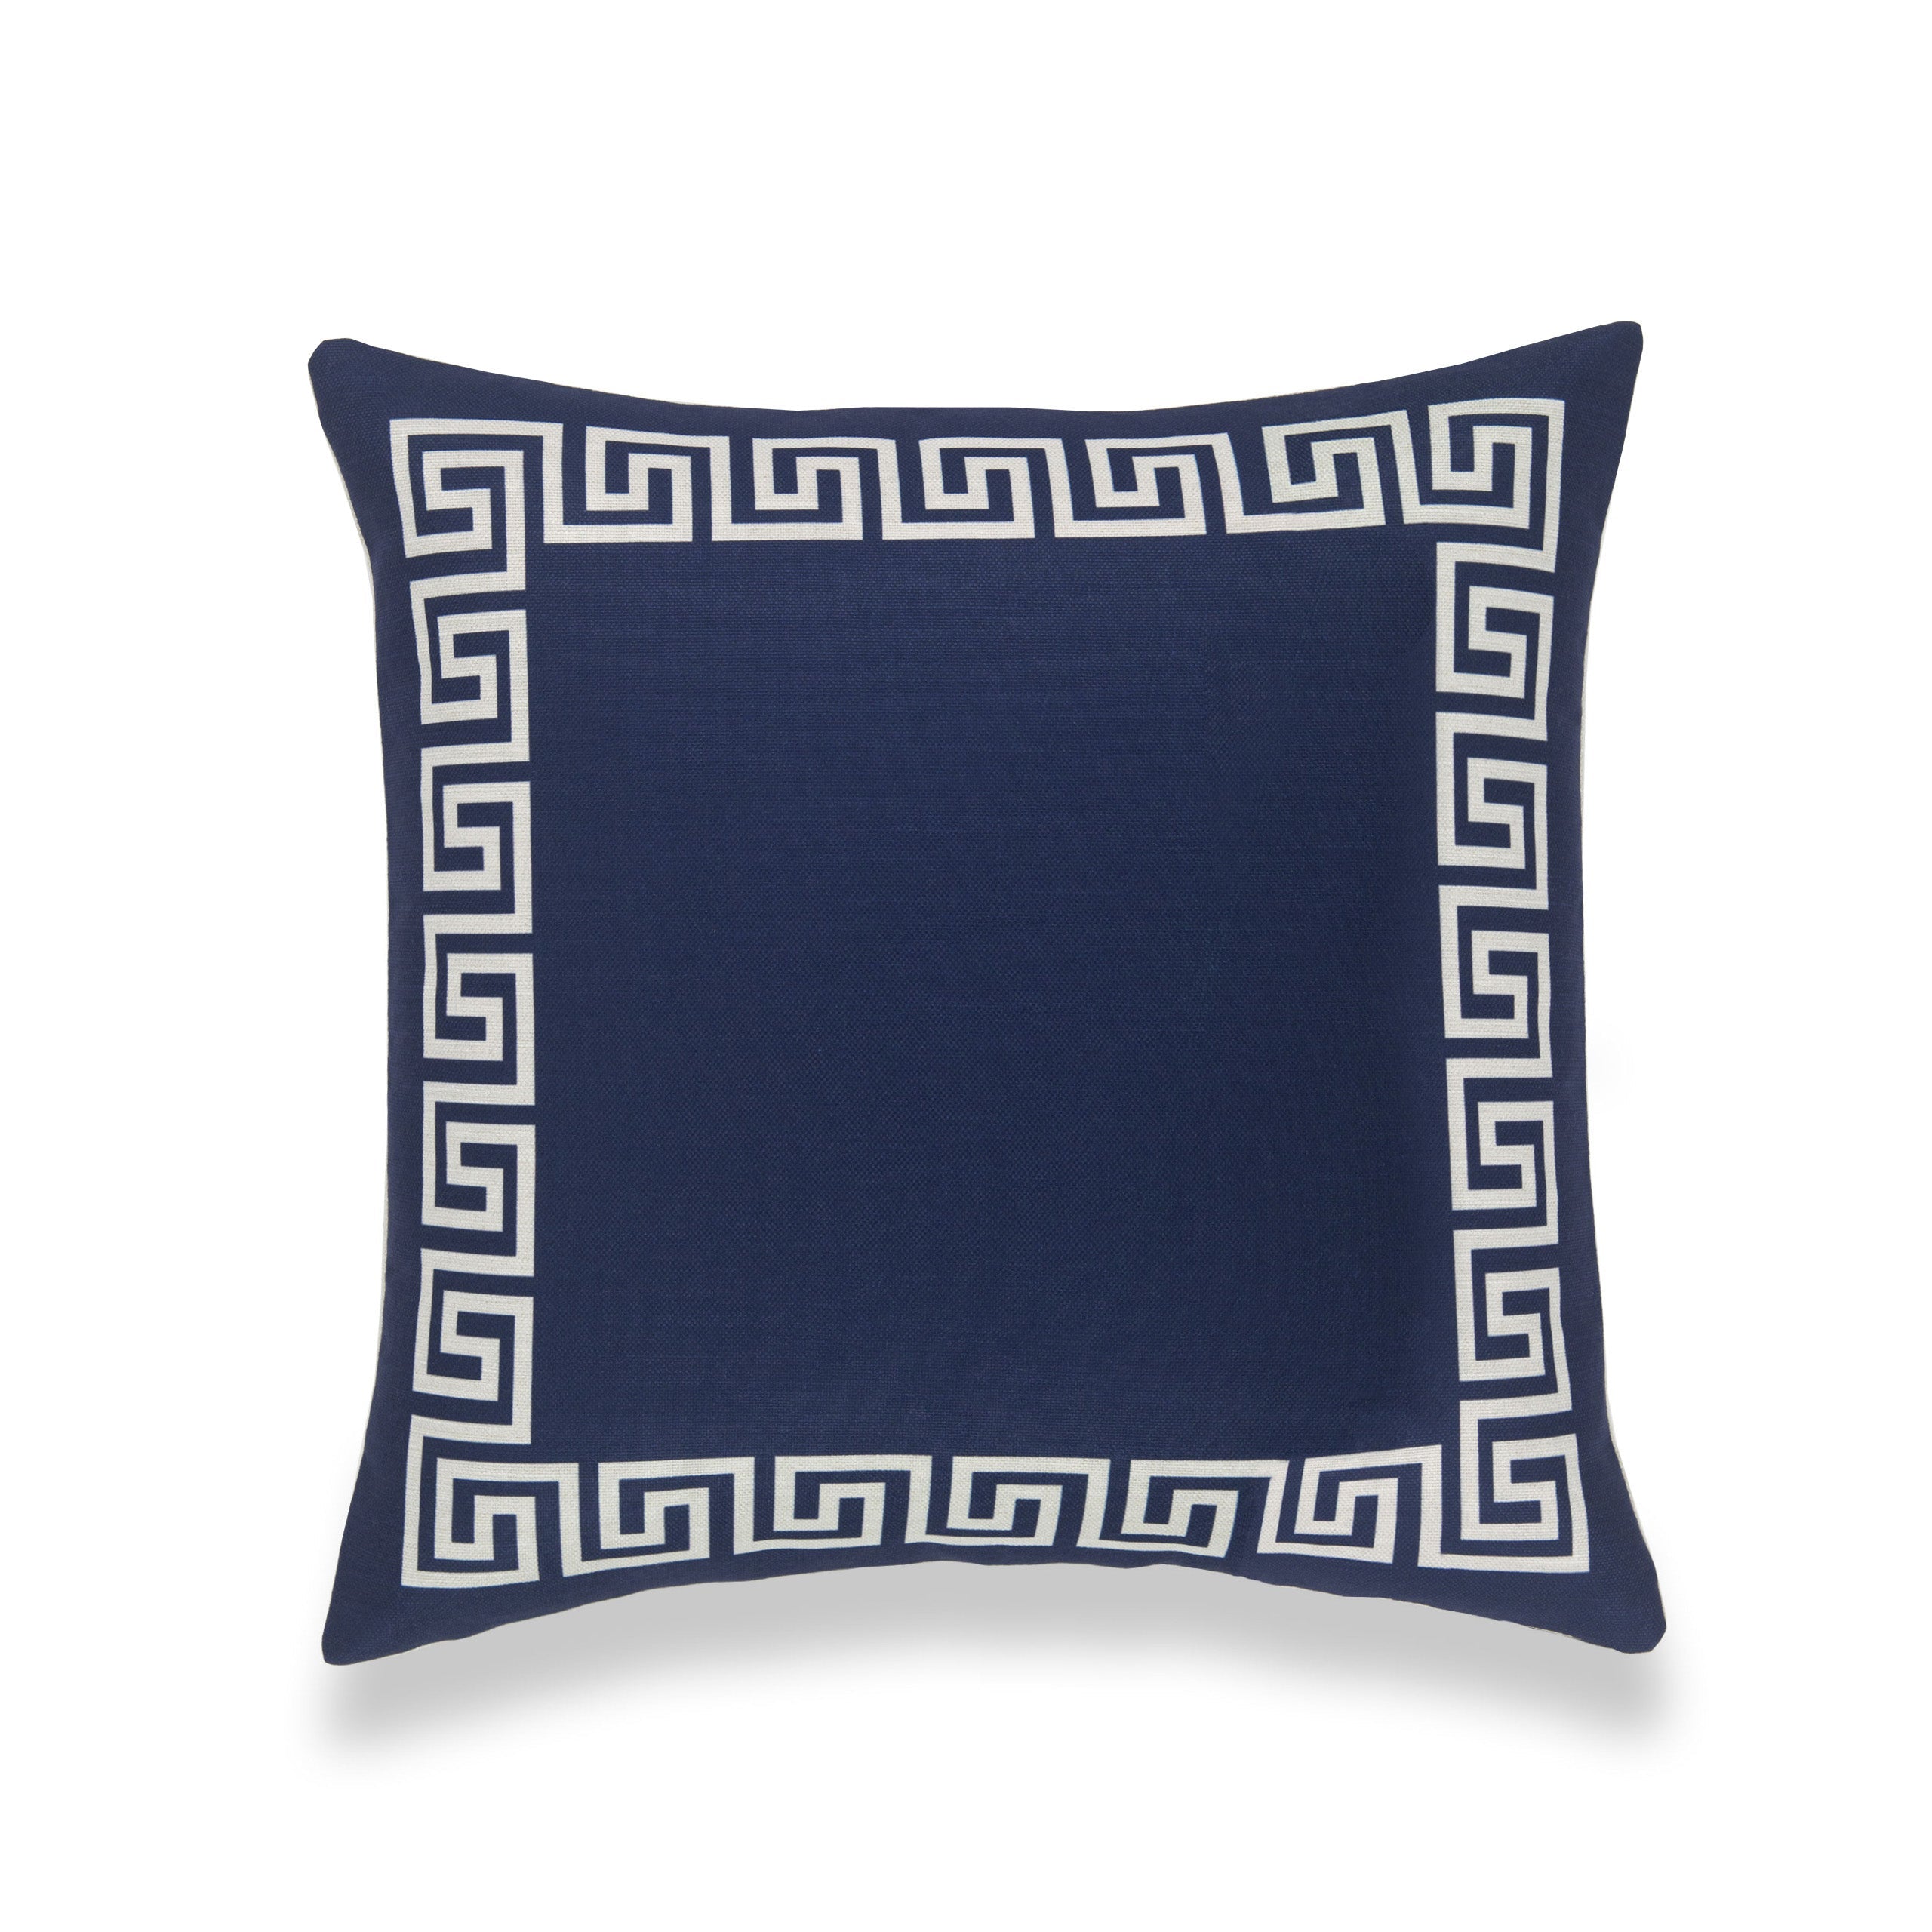 Coastal Indoor Outdoor Pillow Cover, Helicon, Greek Key, Navy Blue, 18"x18"